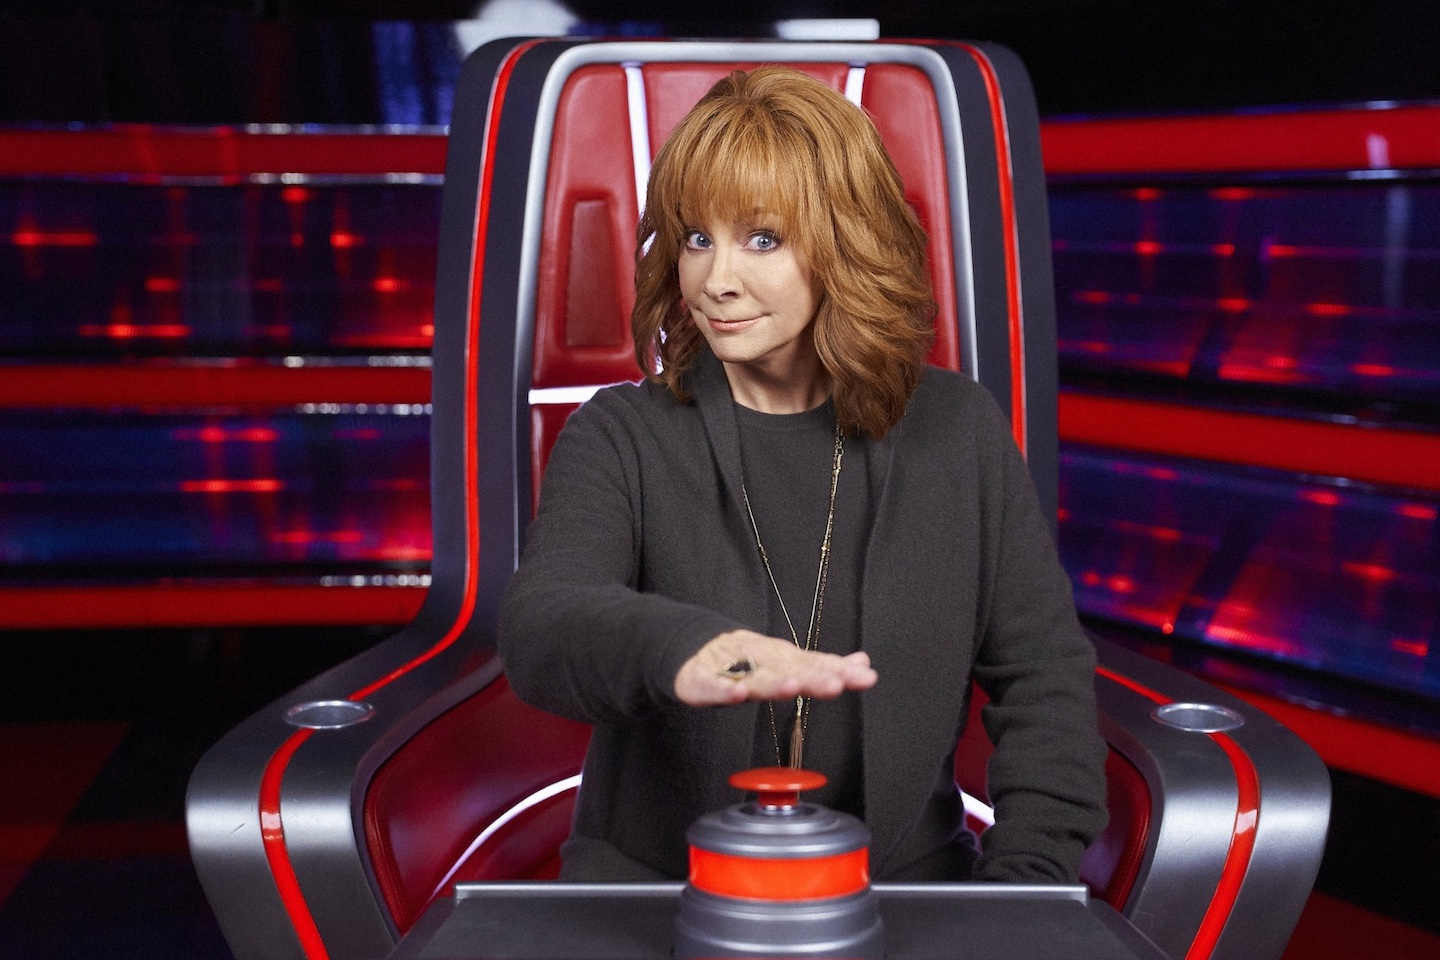 Pictured on `The Voice` `The Knockouts Premiere` is Reba McEntire. (NBC photo by Tyler Golden)